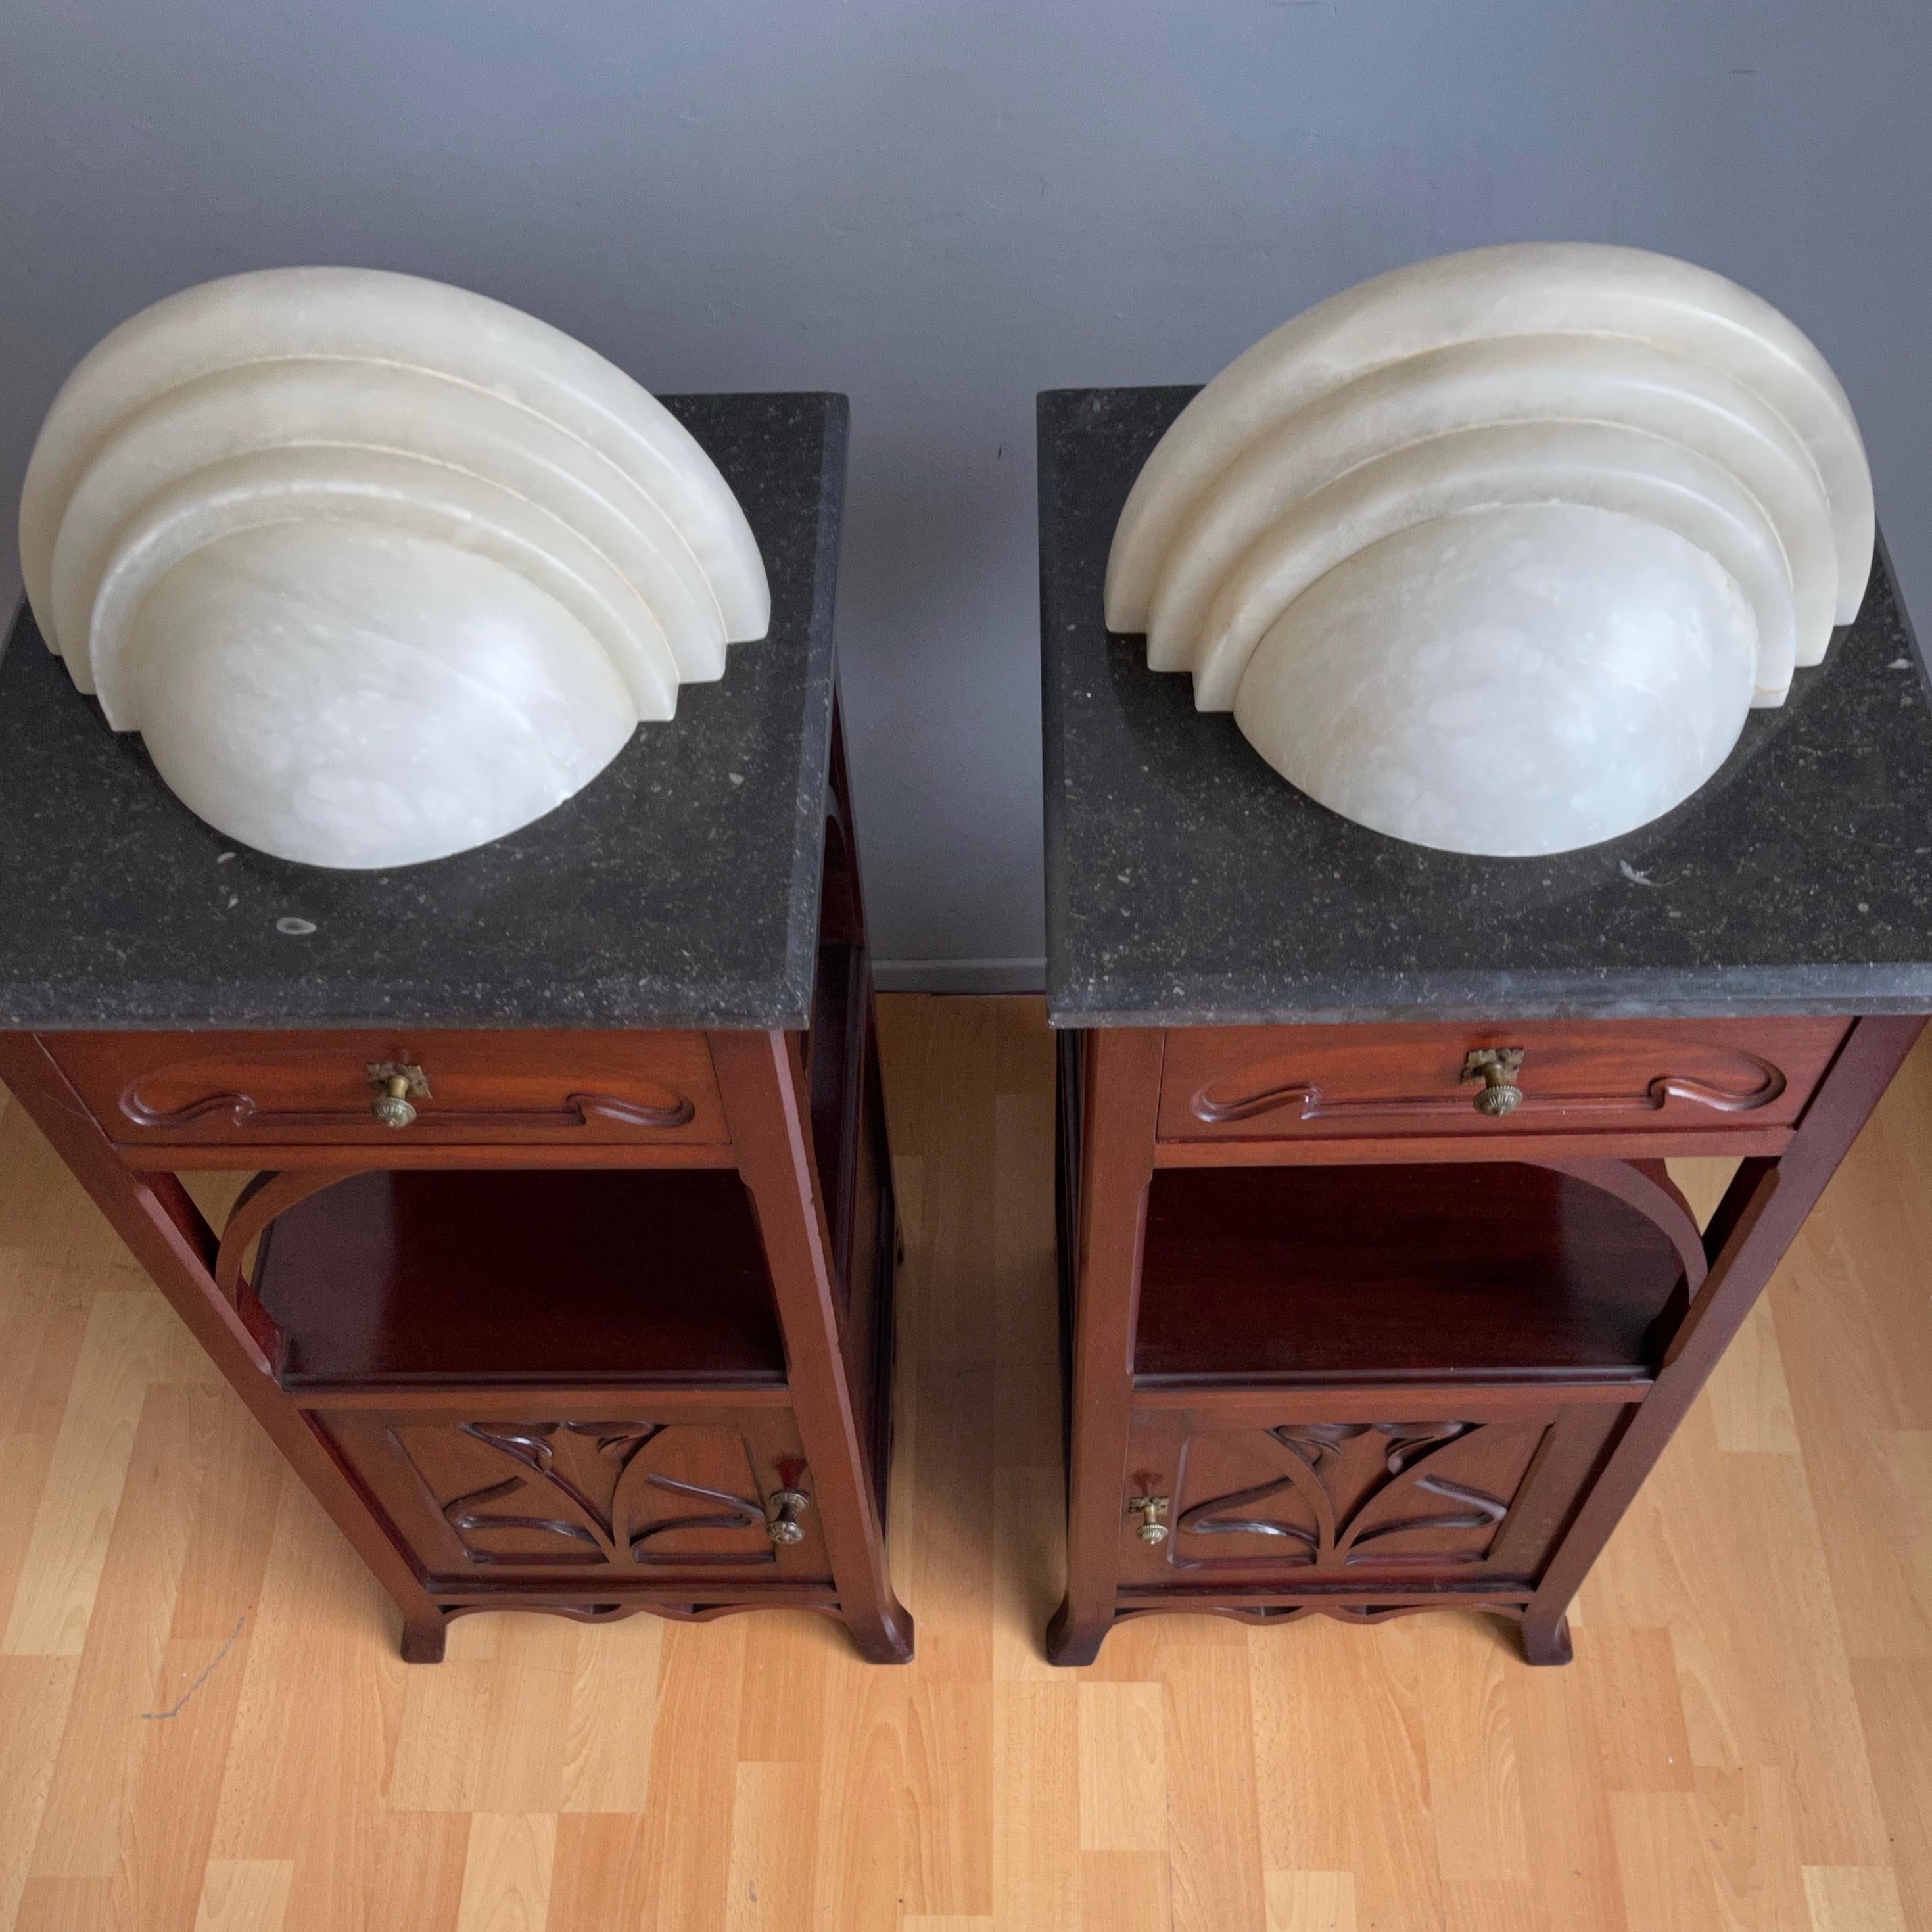 European Exceptional Shape Midcentury Era Large Pair Alabaster Wall Sconces Lamps Lights  For Sale